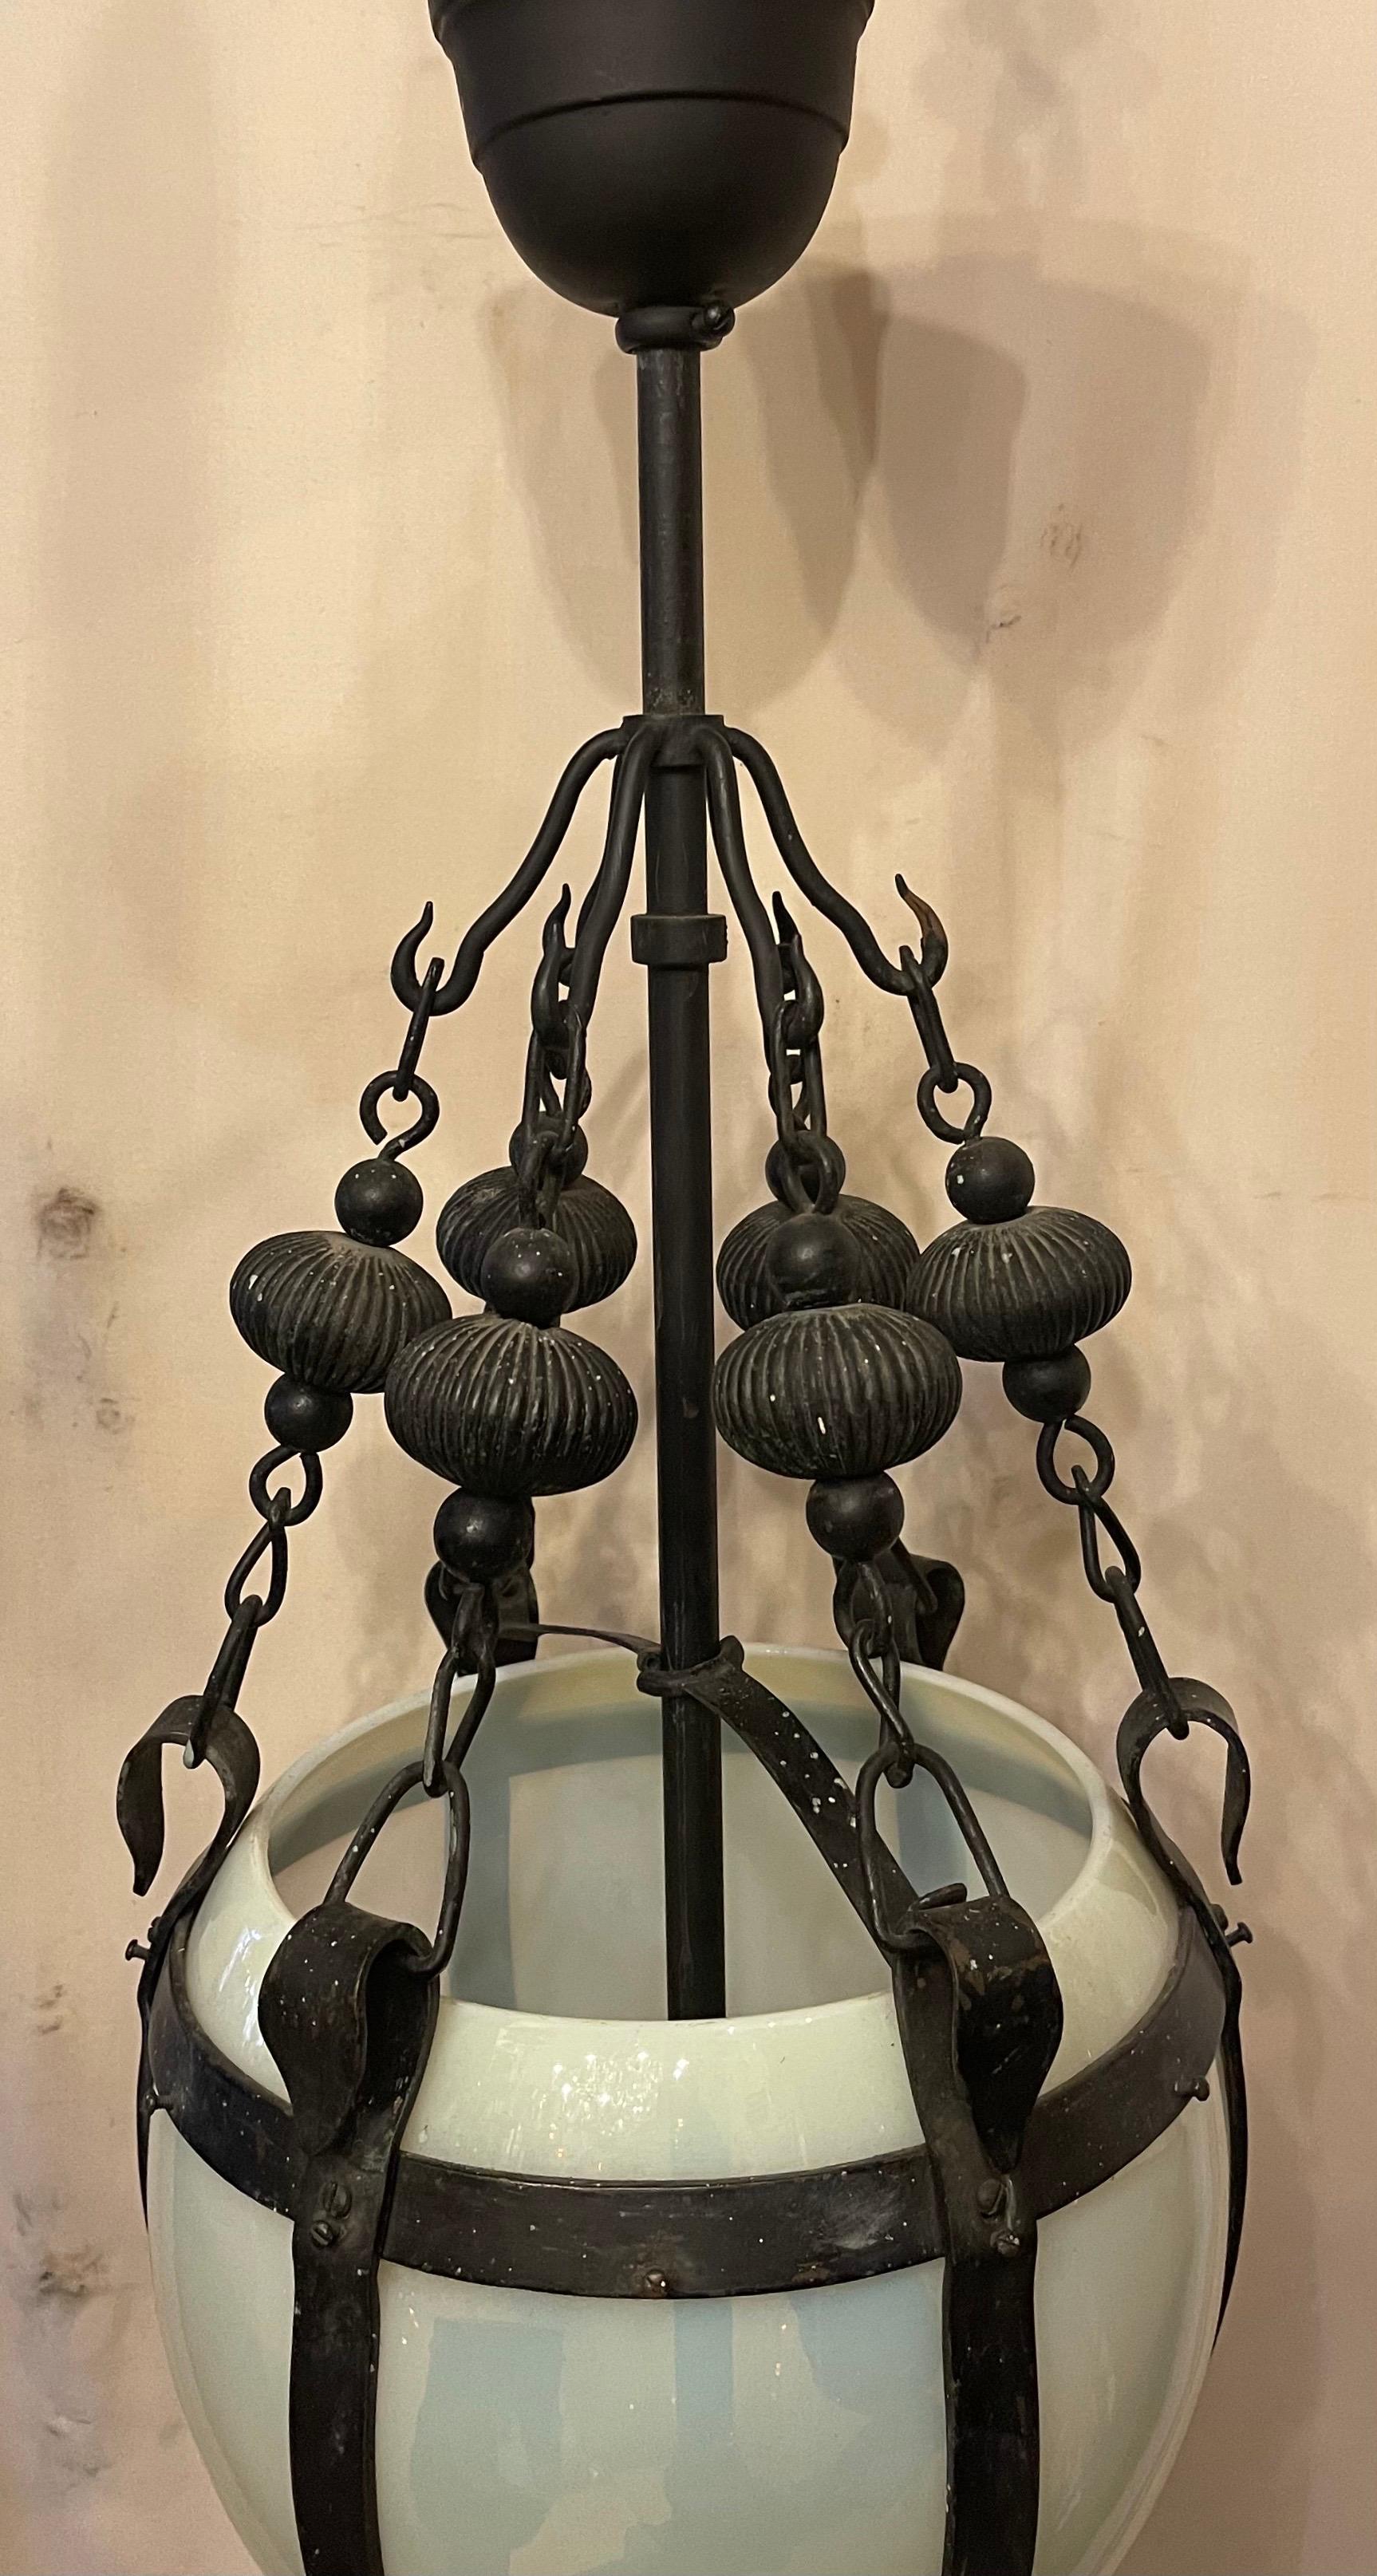 A wonderful French Art Deco opaline glass and wrought iron lantern pendant light fixture with 2 Edison sockets.